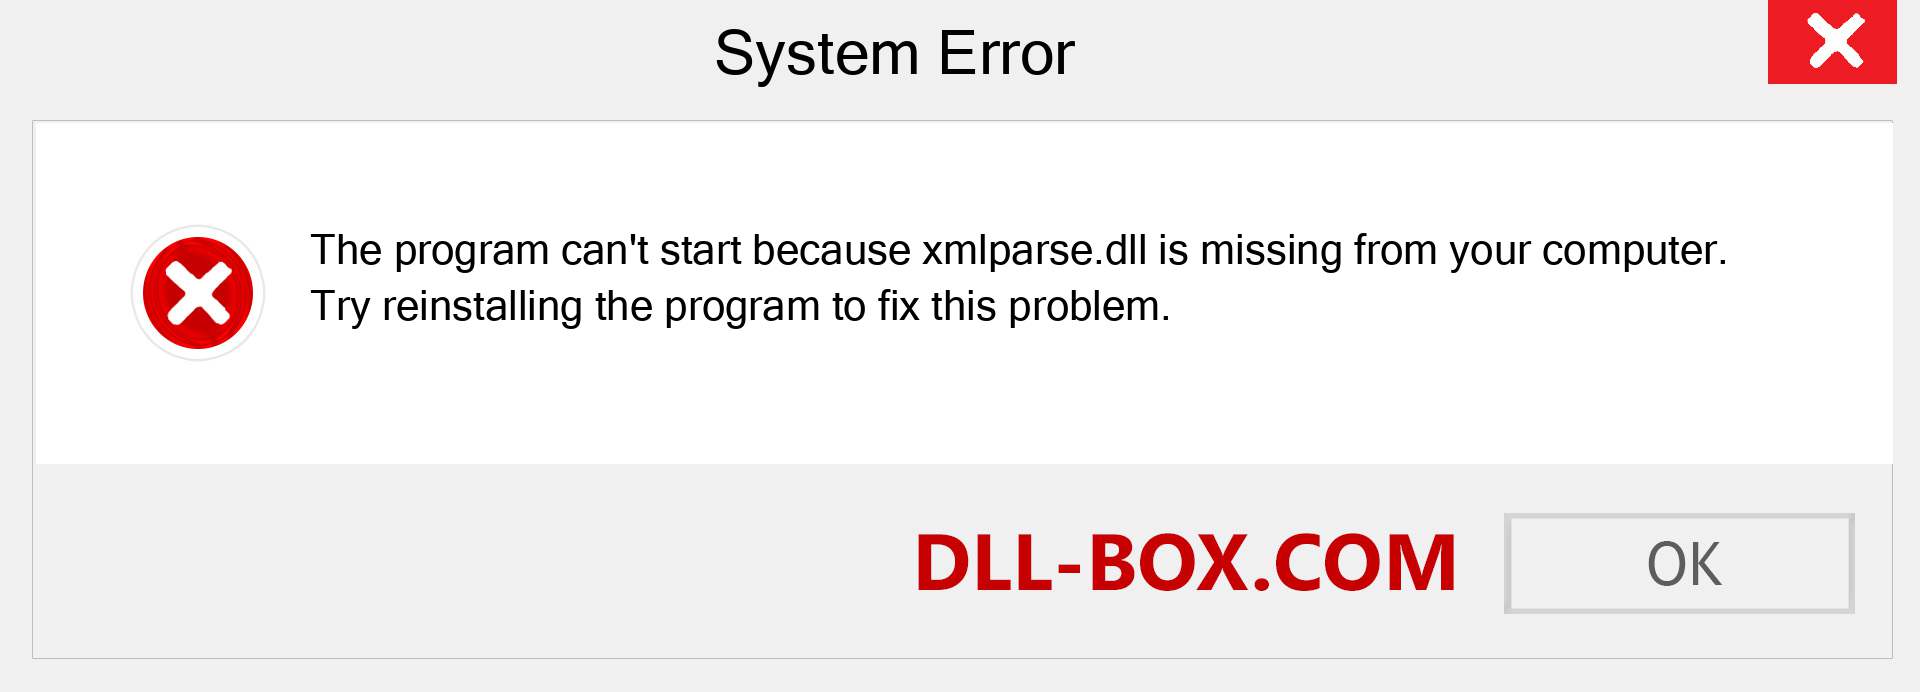  xmlparse.dll file is missing?. Download for Windows 7, 8, 10 - Fix  xmlparse dll Missing Error on Windows, photos, images